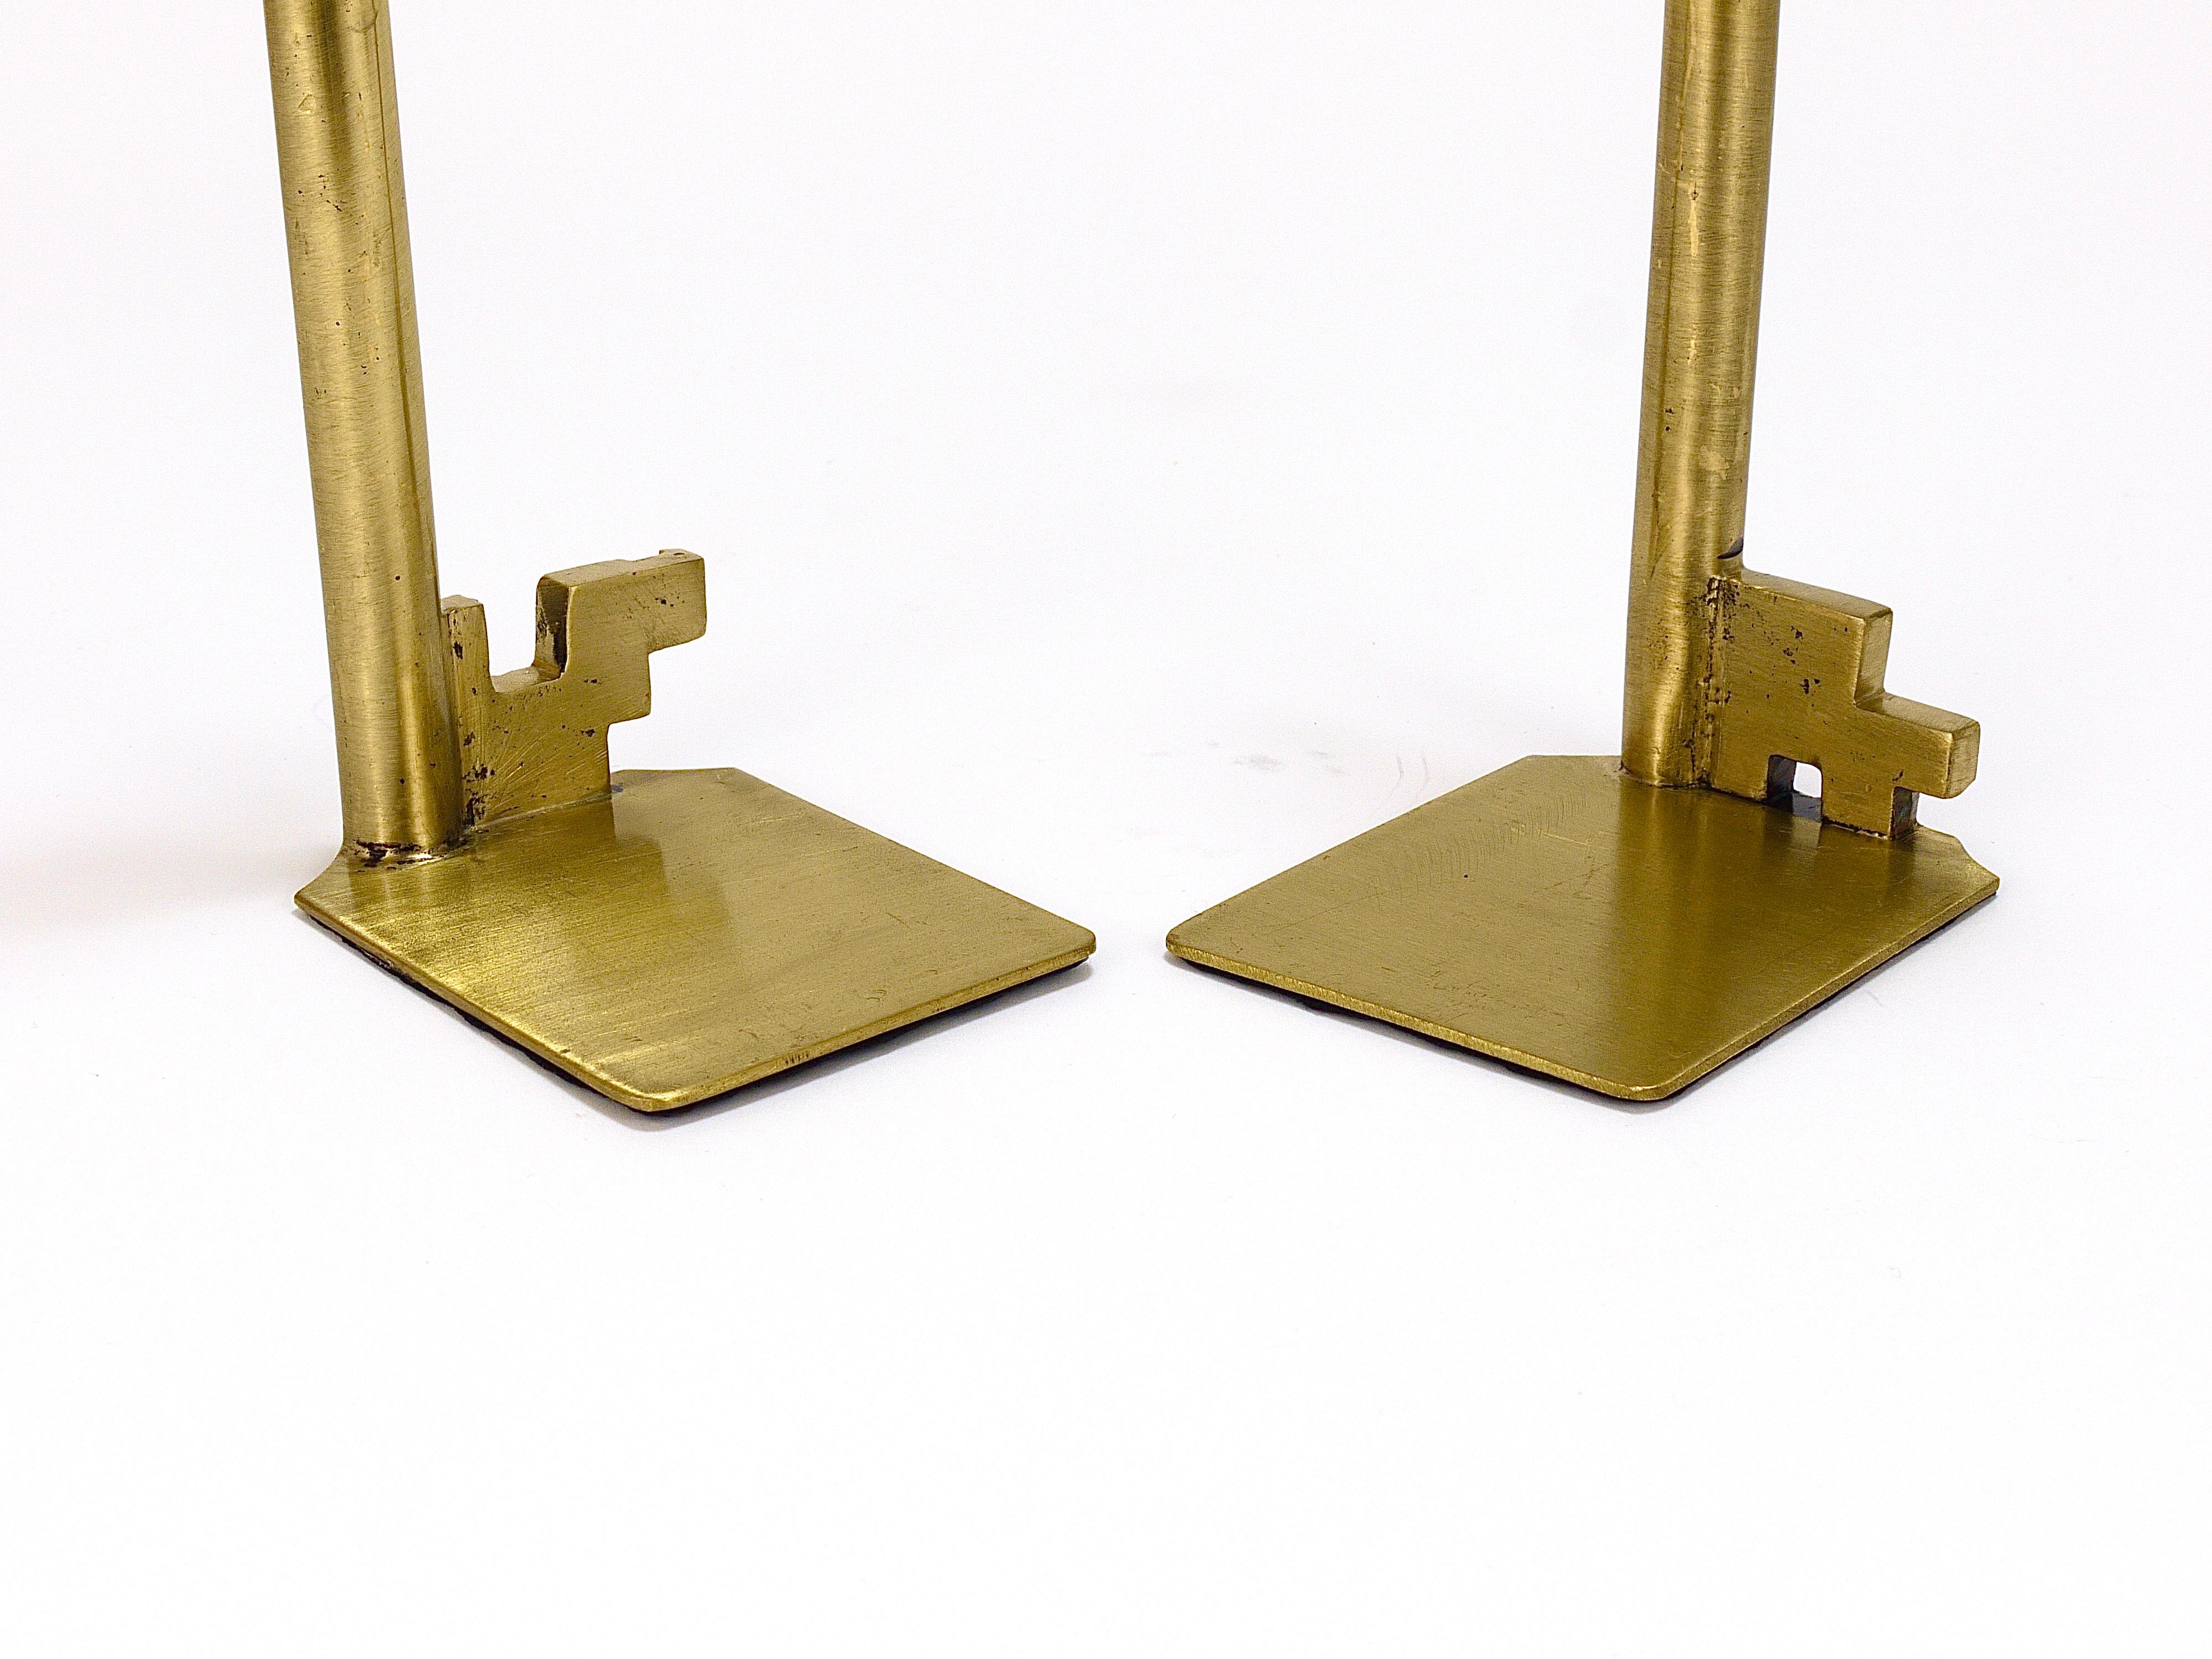 Sculptural Austrian Midcentury Brass Key Book Ends from the, 1950s For Sale 5